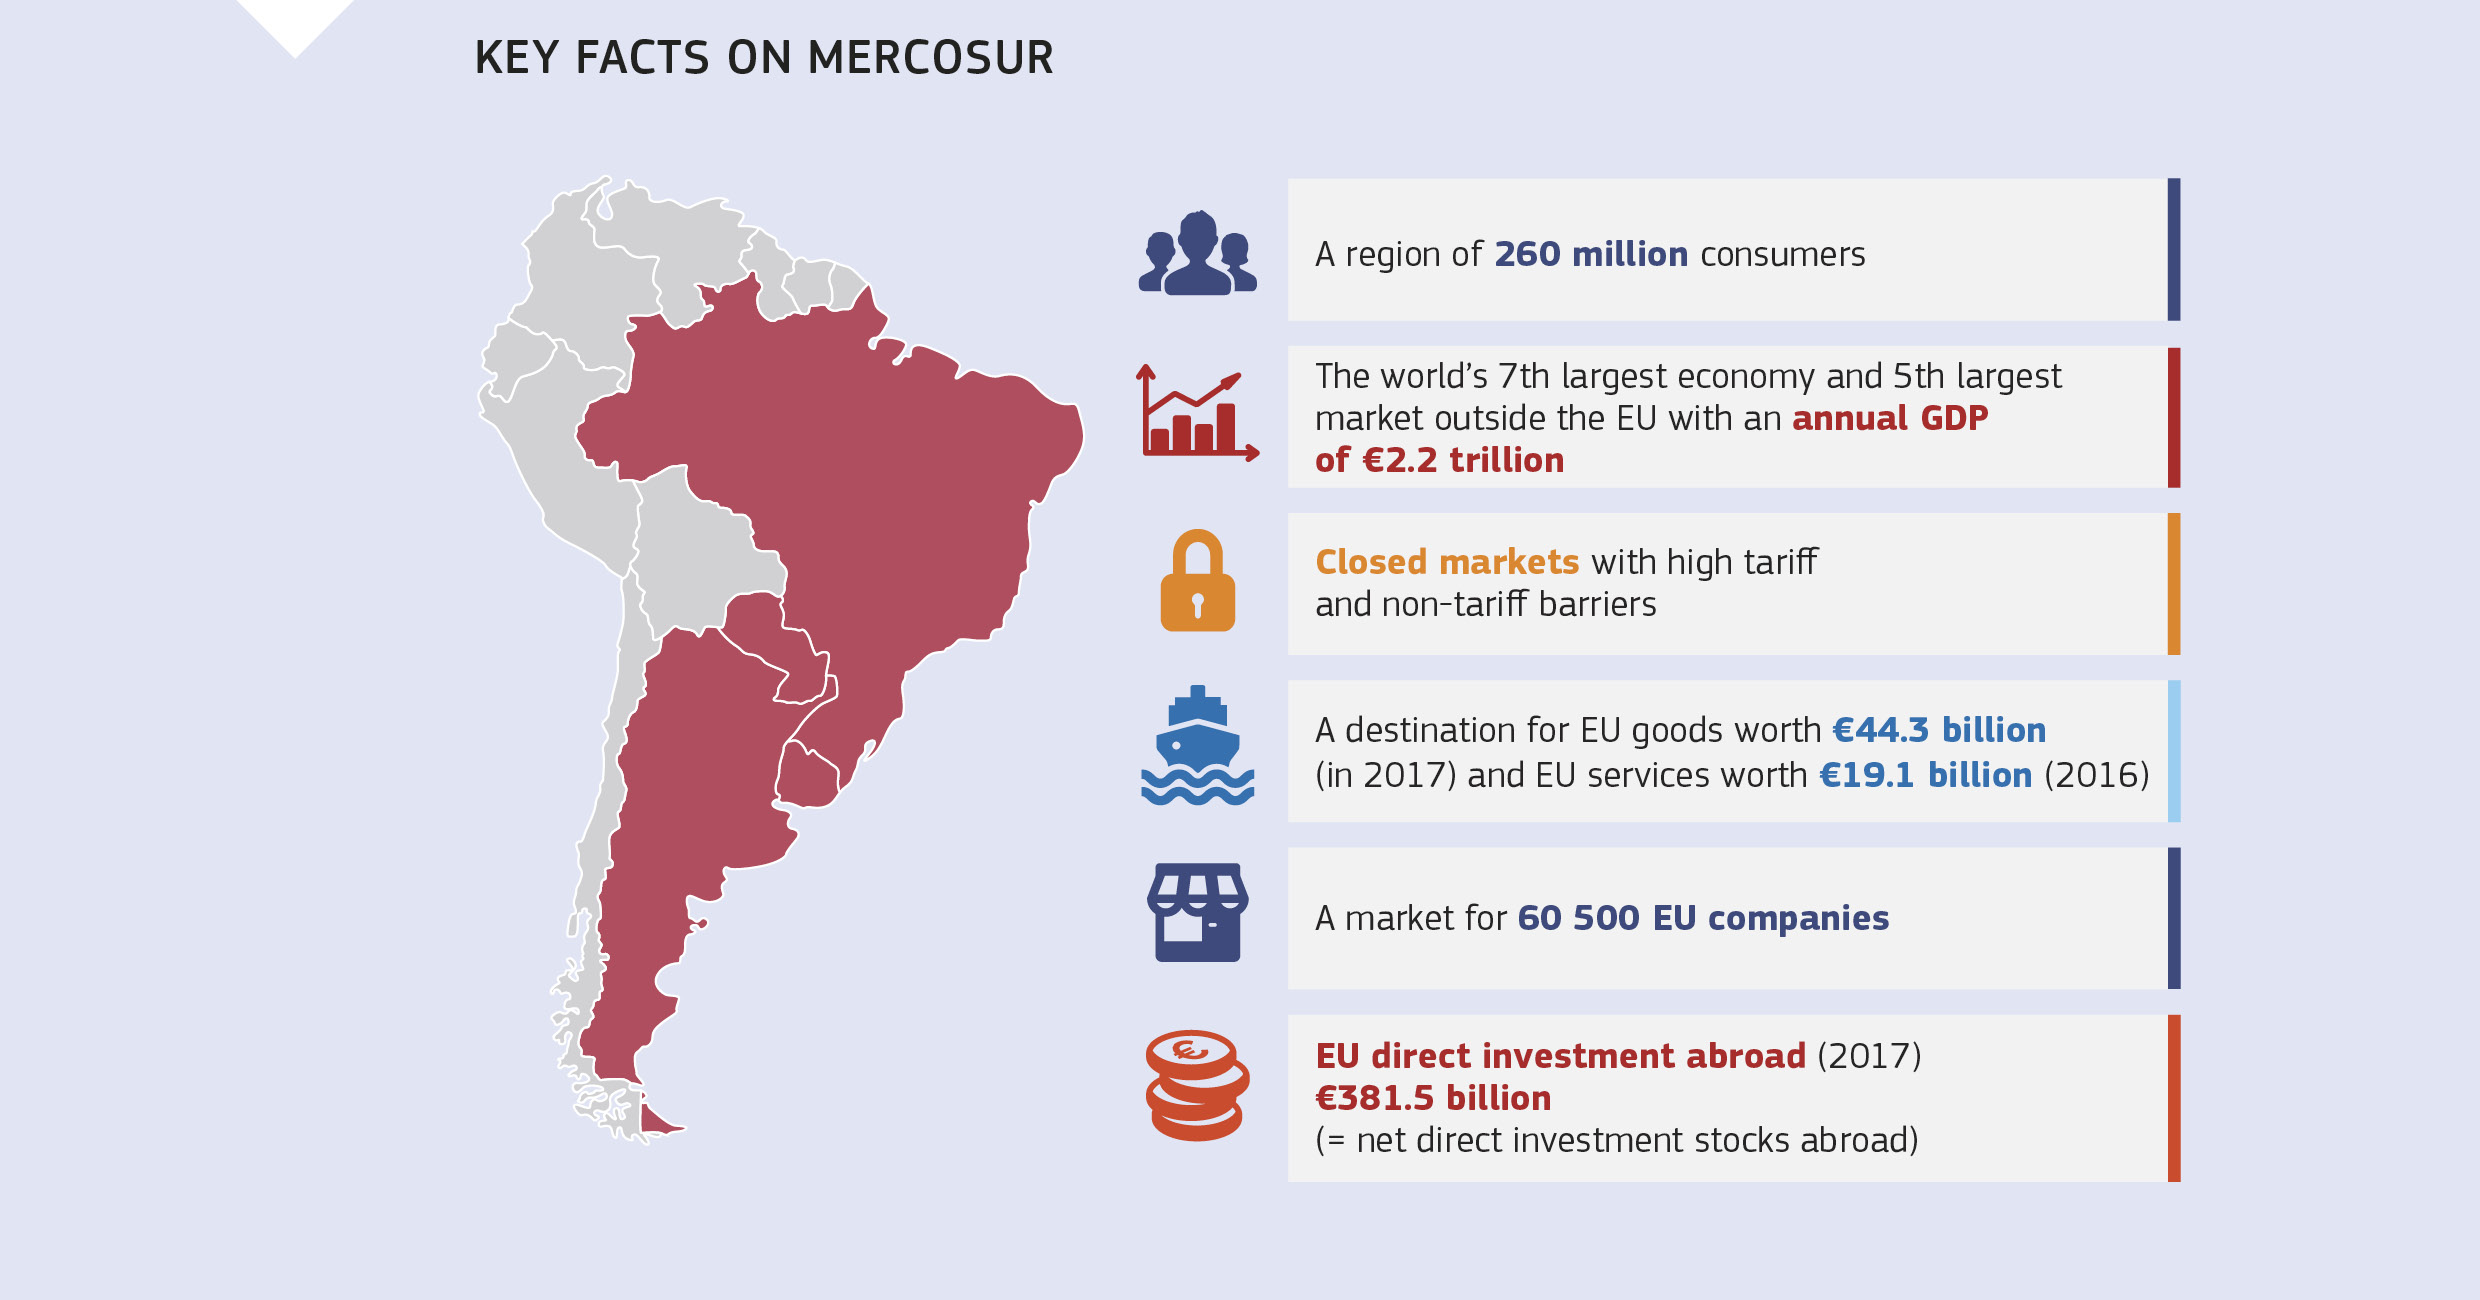 KEY FACTS ON MERCOSUR